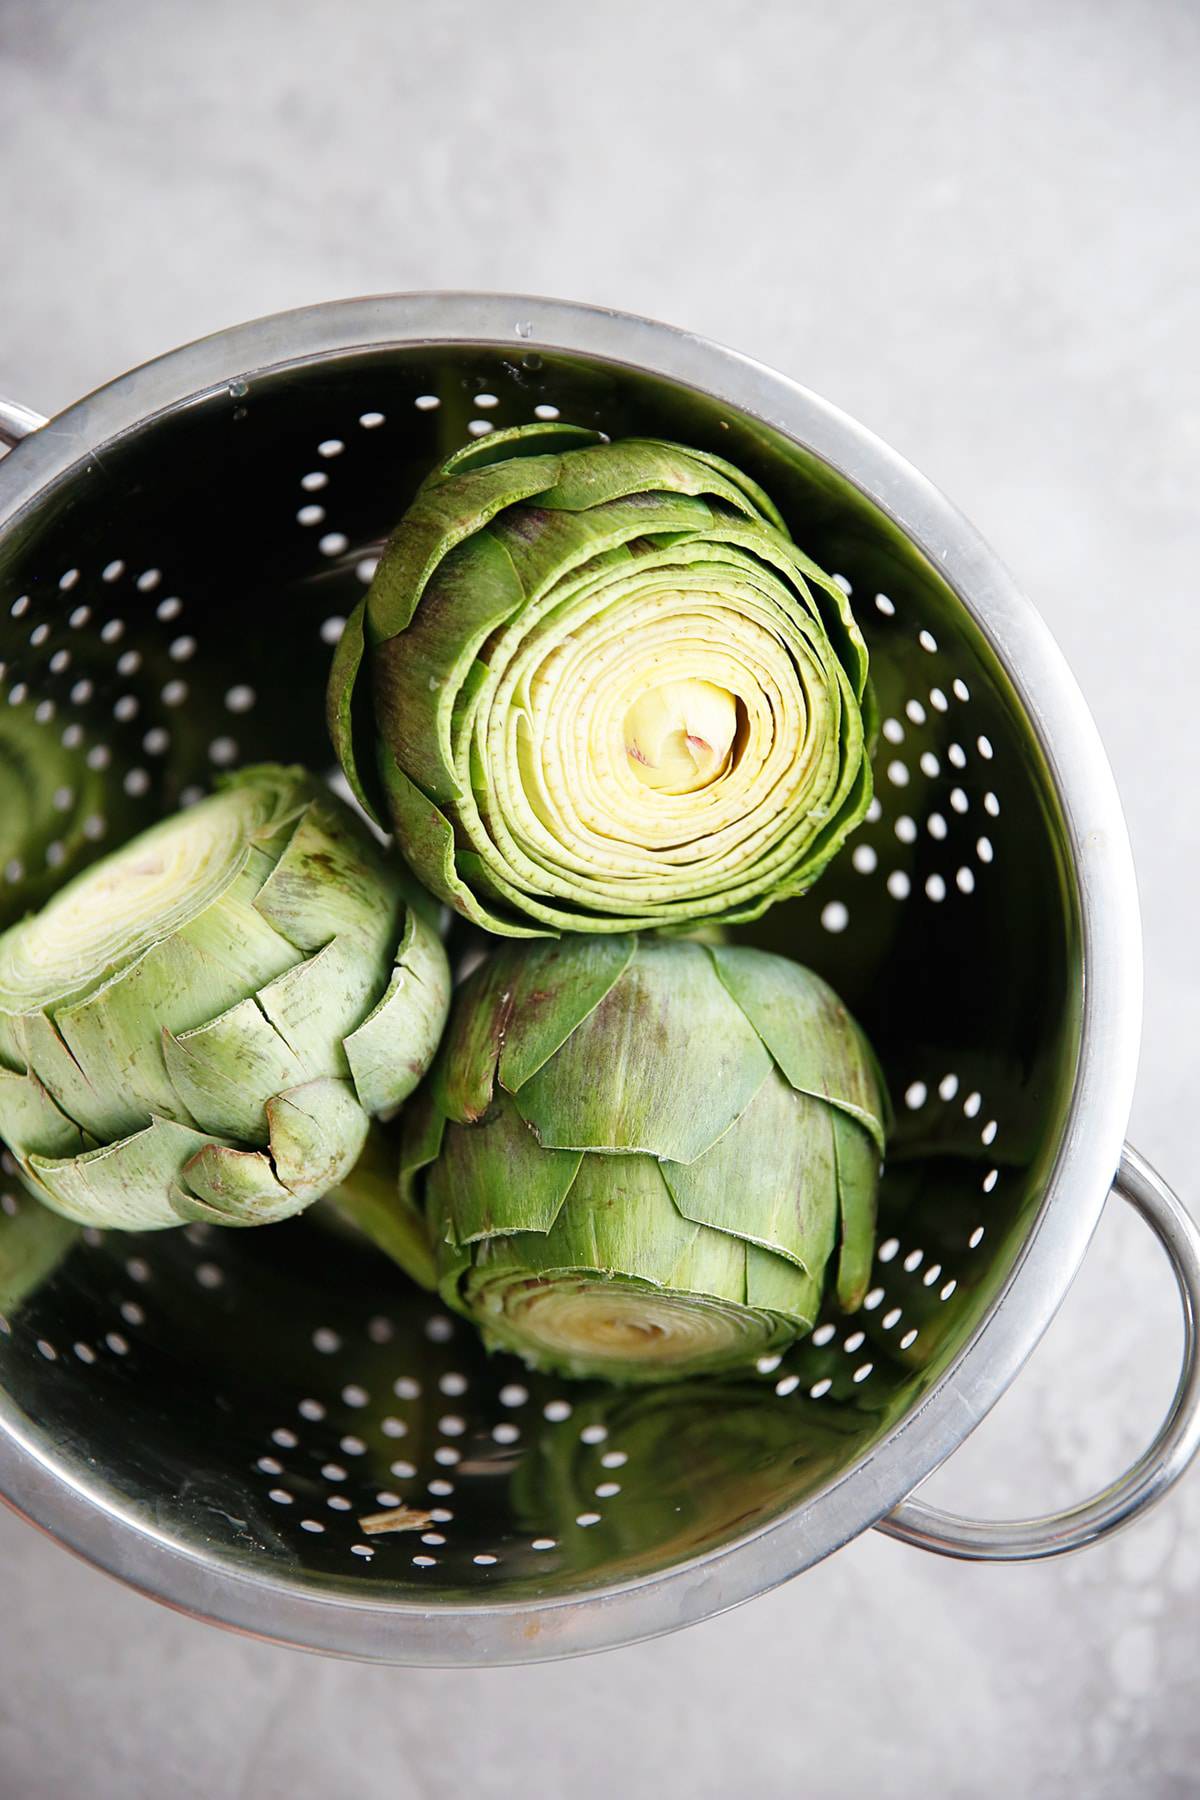 Artichoke 101: Everything You Need To Know!